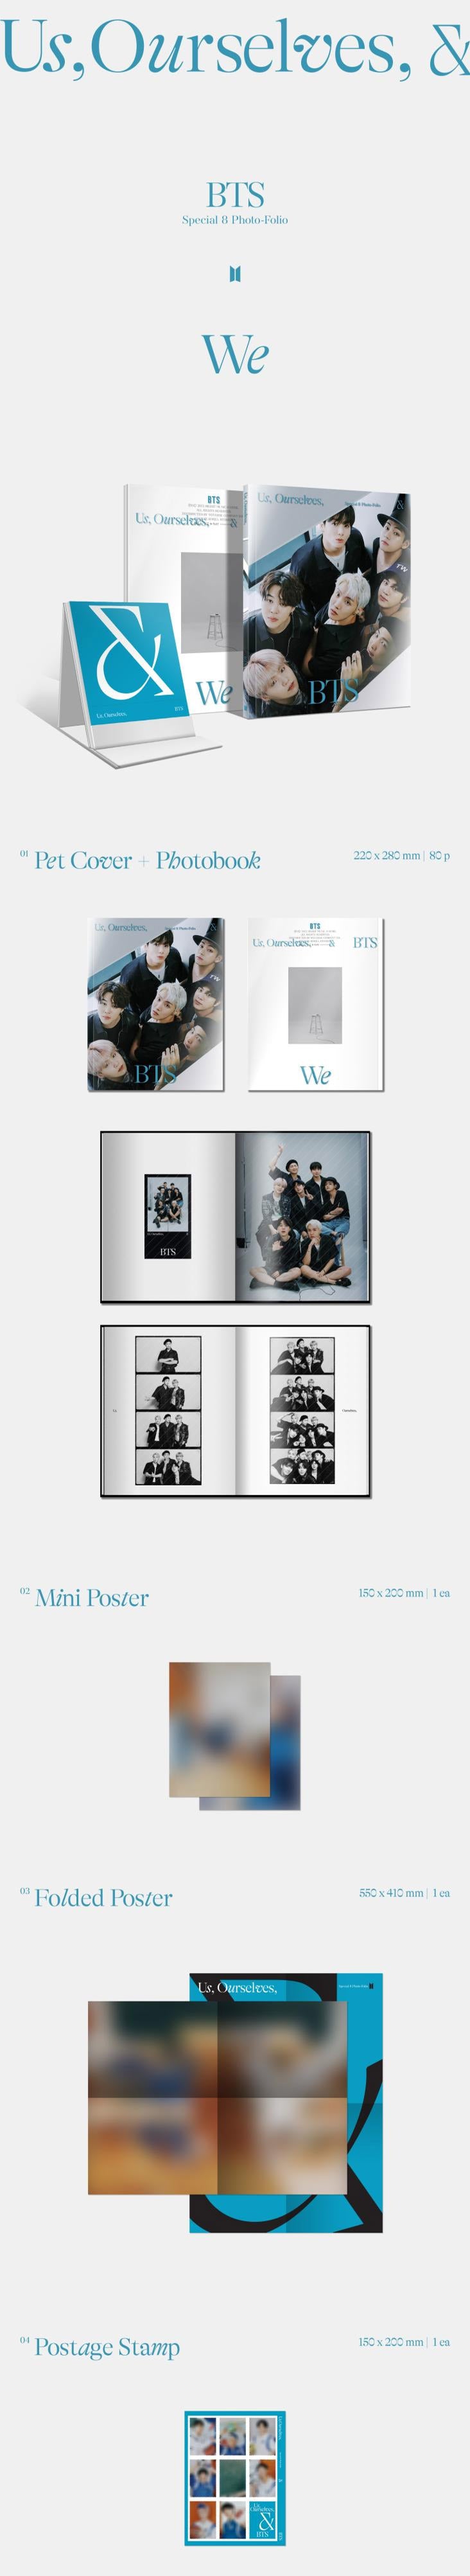 BTS - US, OURSELVES, AND BTS [WE]